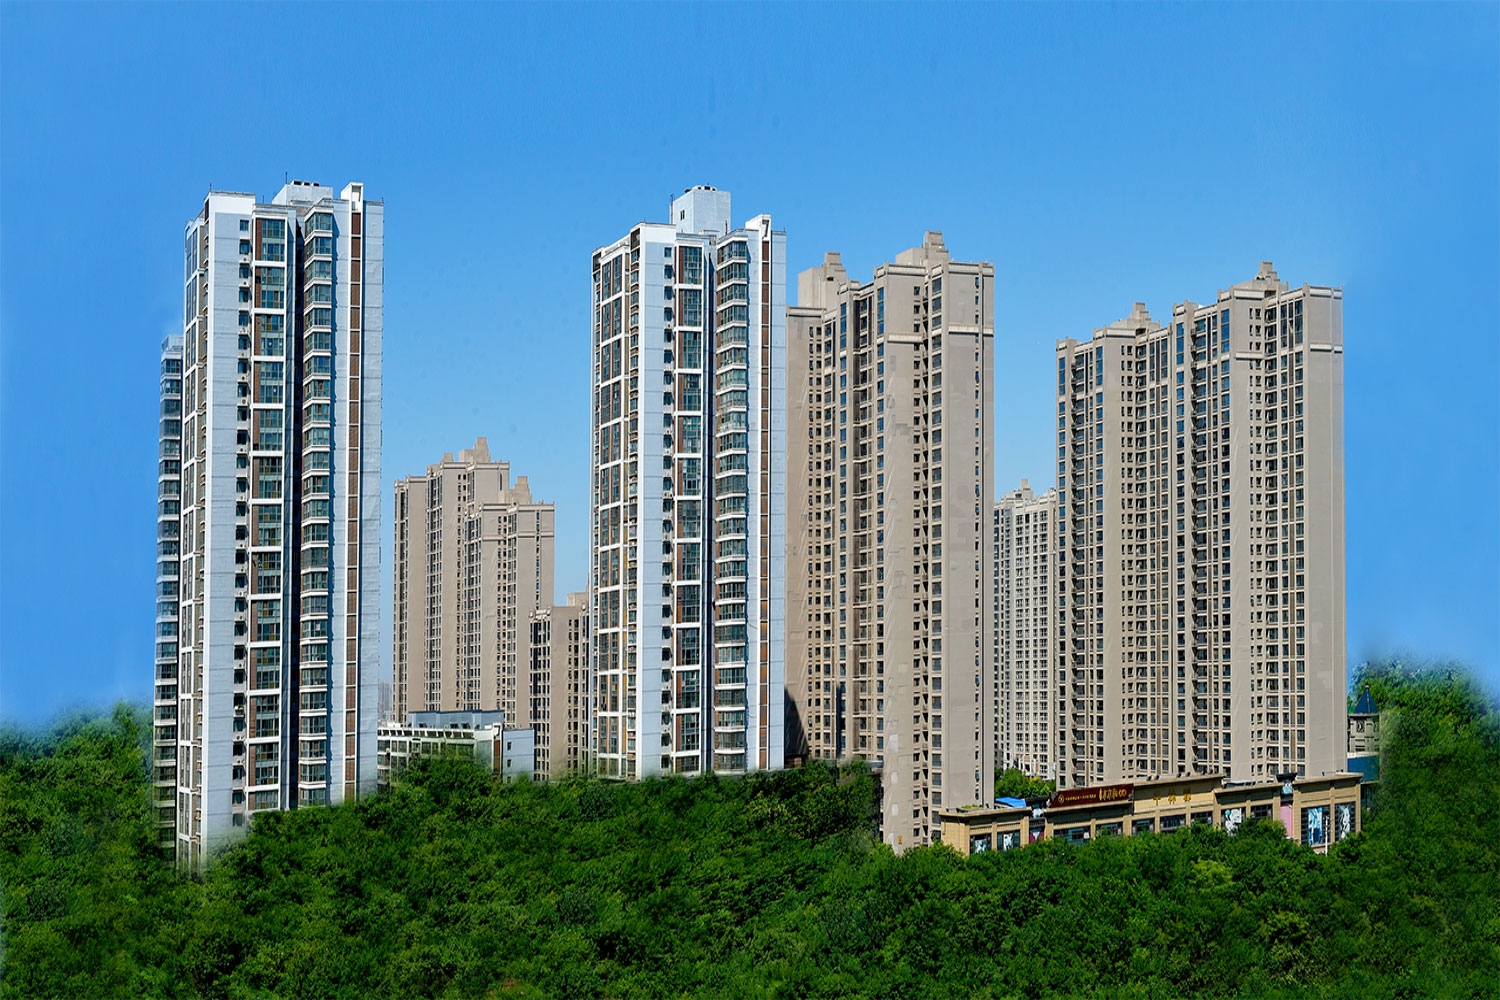 3#, 5#, 6# residential buildings of yingtai qujiang residential district (first phase)